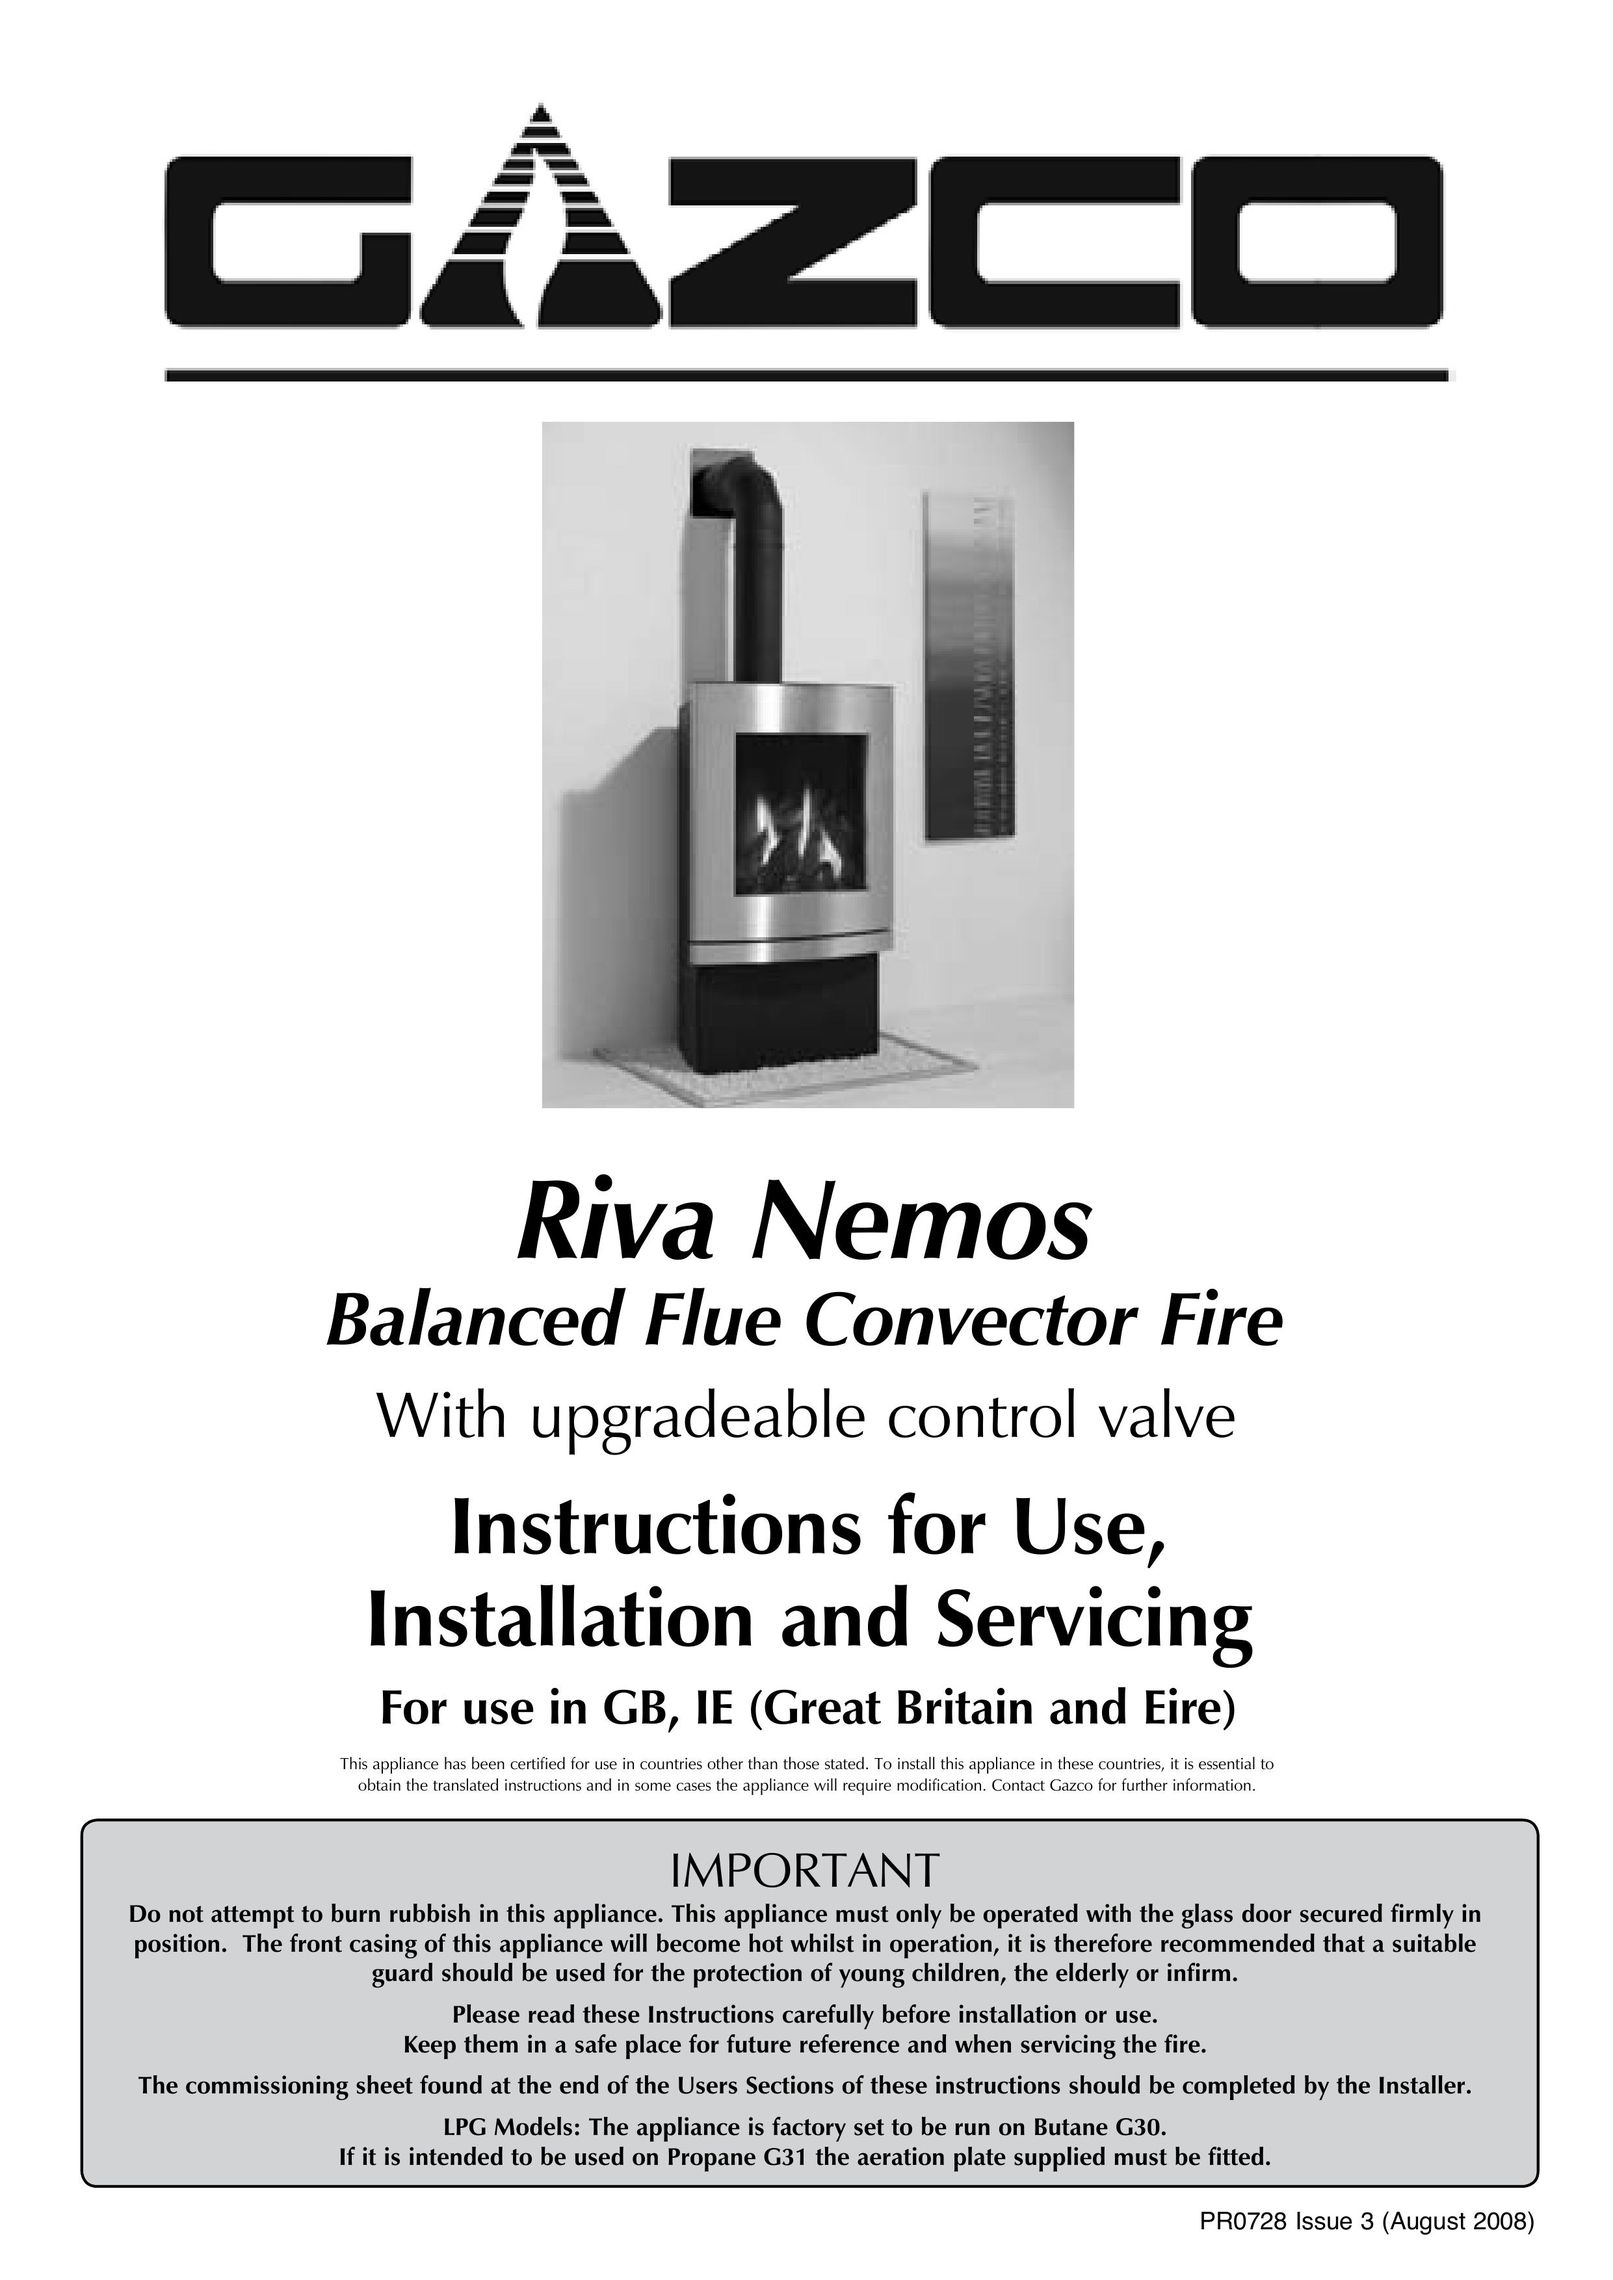 Stovax 8627 MA Indoor Fireplace User Manual